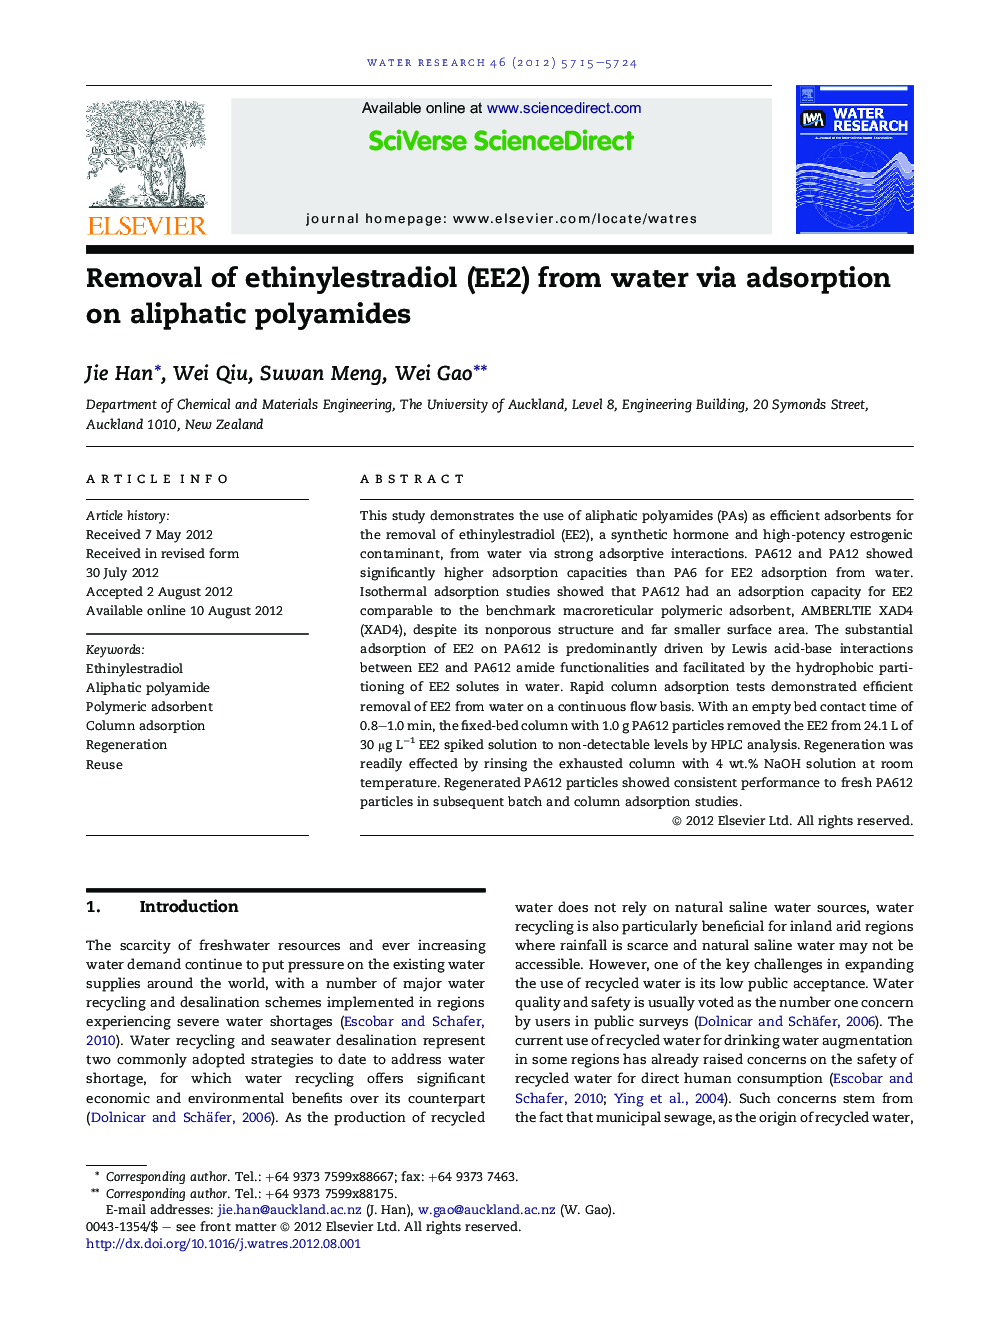 Removal of ethinylestradiol (EE2) from water via adsorption on aliphatic polyamides